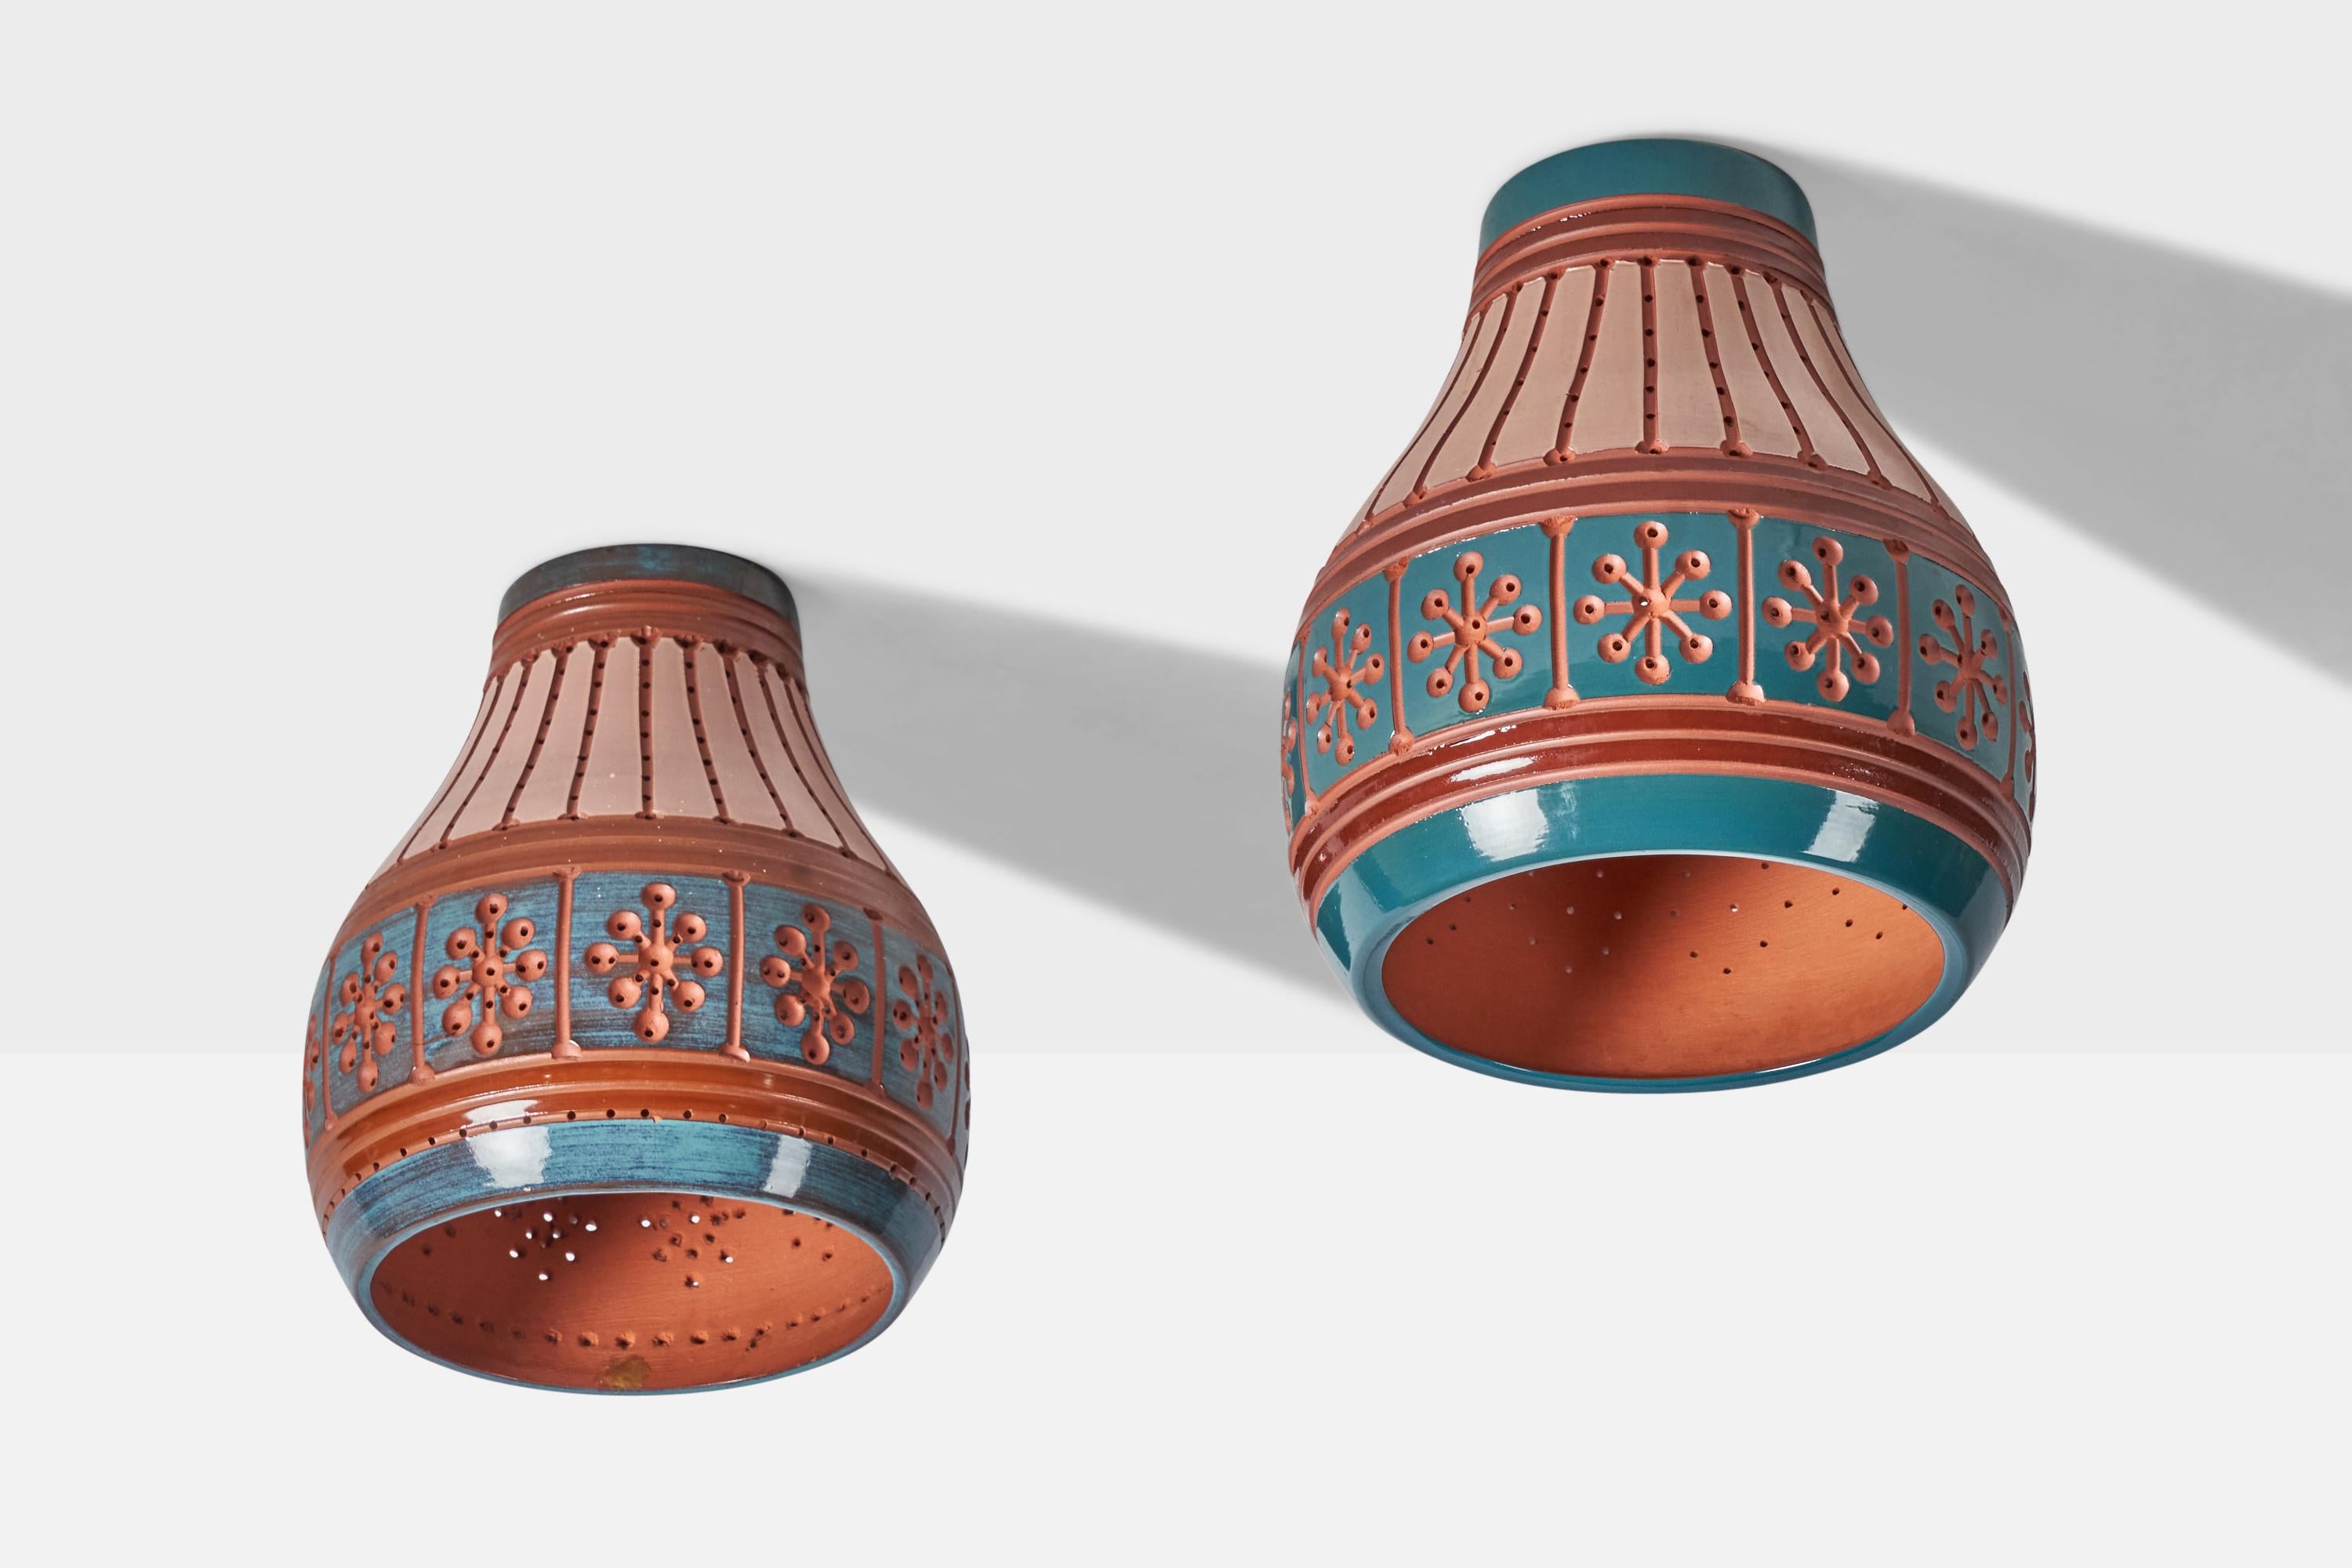 A pair of hand-painted pink, red and blue ceramic flush mounts or pendant lights, designed and produced by Martha & Beaumont Mood, San Antonio, Texas, USA, 1970s.

Overall Dimensions (inches): 12.5” H x 11” Diameter
Bulb Specifications: E-26